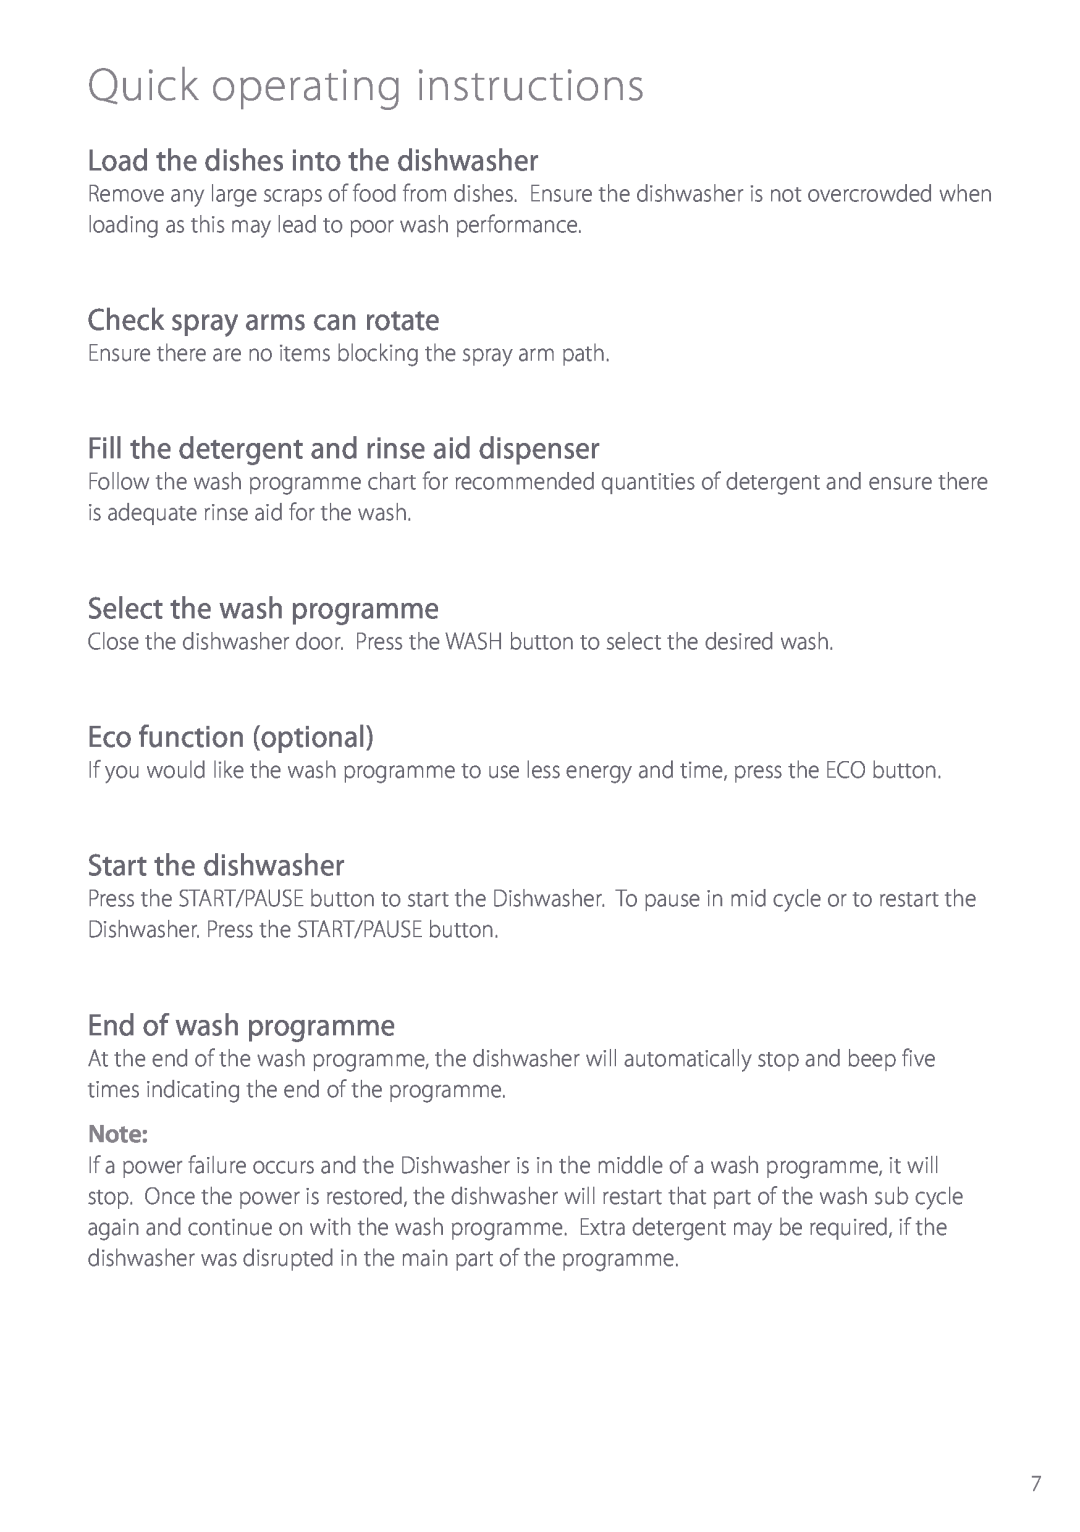 Fisher & Paykel DW820 Quick operating instructions, Load the dishes into the dishwasher, Check spray arms can rotate 